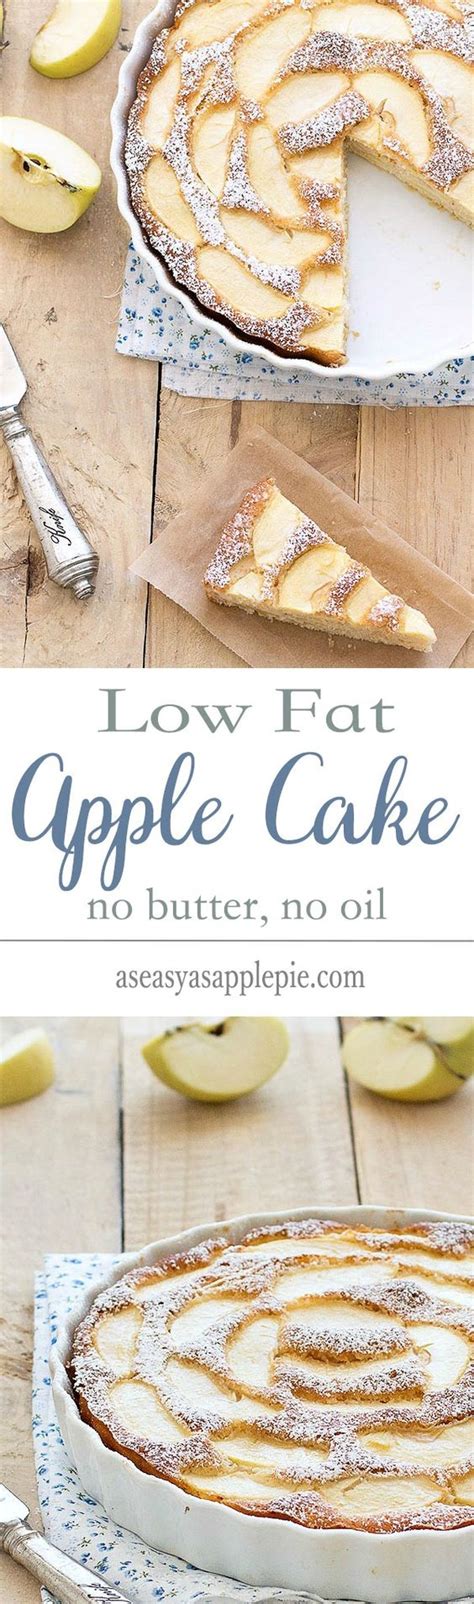 Save 5% more with subscribe & save. Low Fat Apple Cake | Recipe | Follow me, Dairy and Cakes